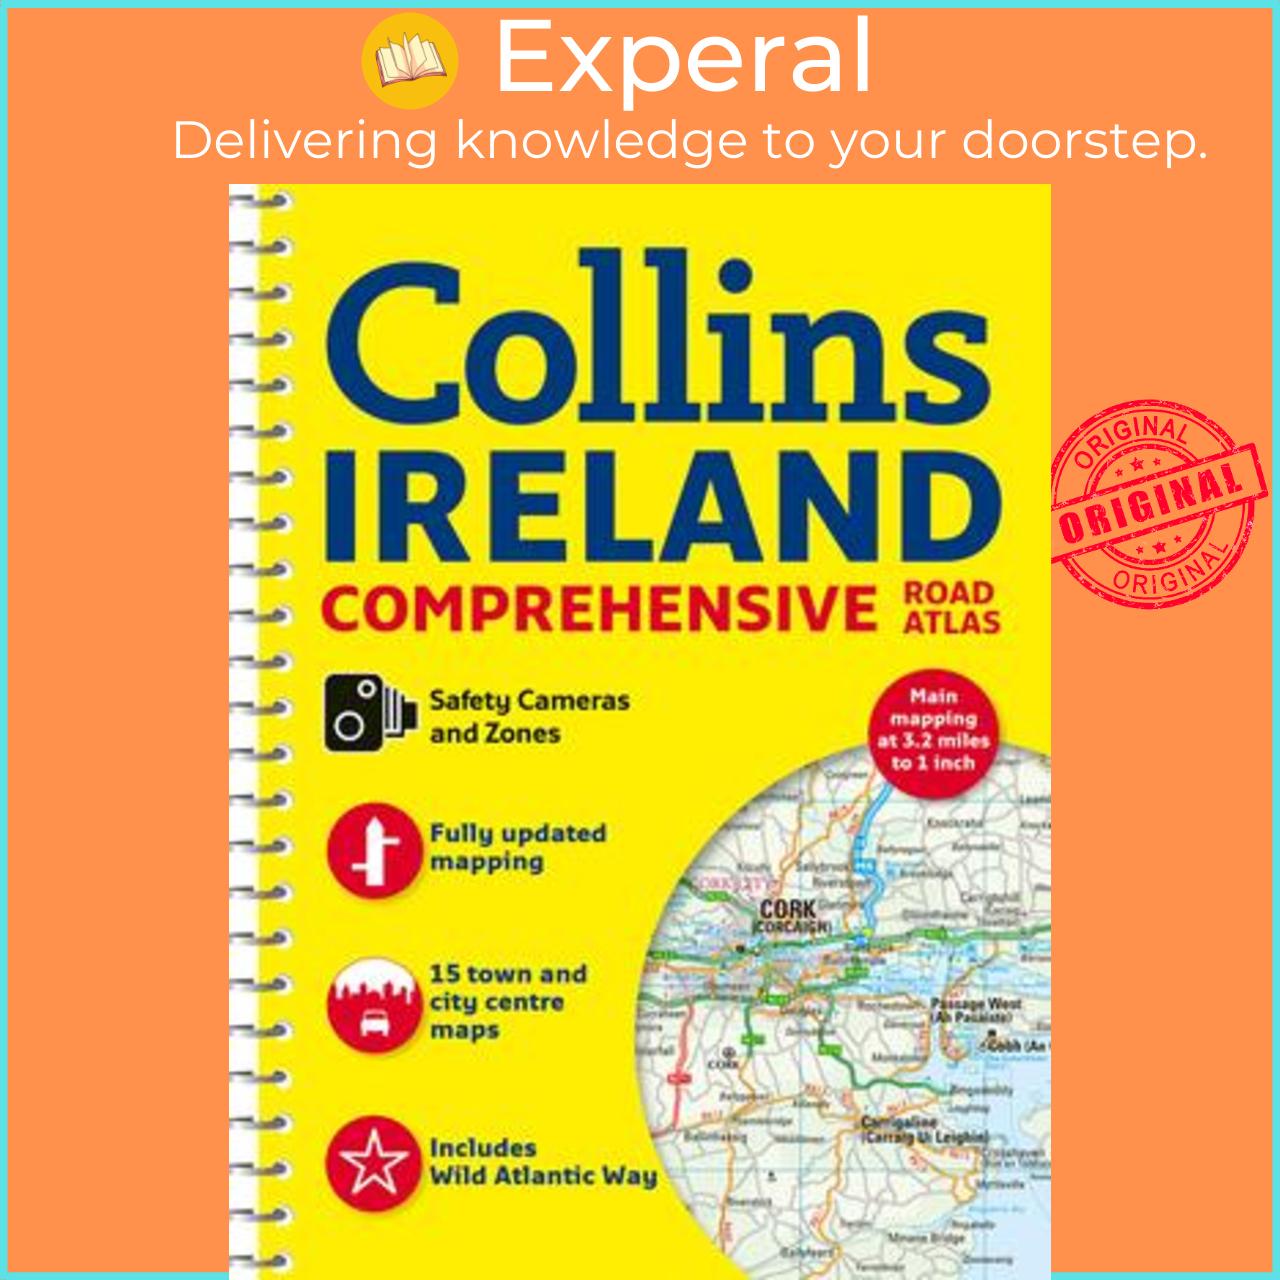 Sách - Comprehensive Road Atlas Ireland by Collins Maps (UK edition, paperback)